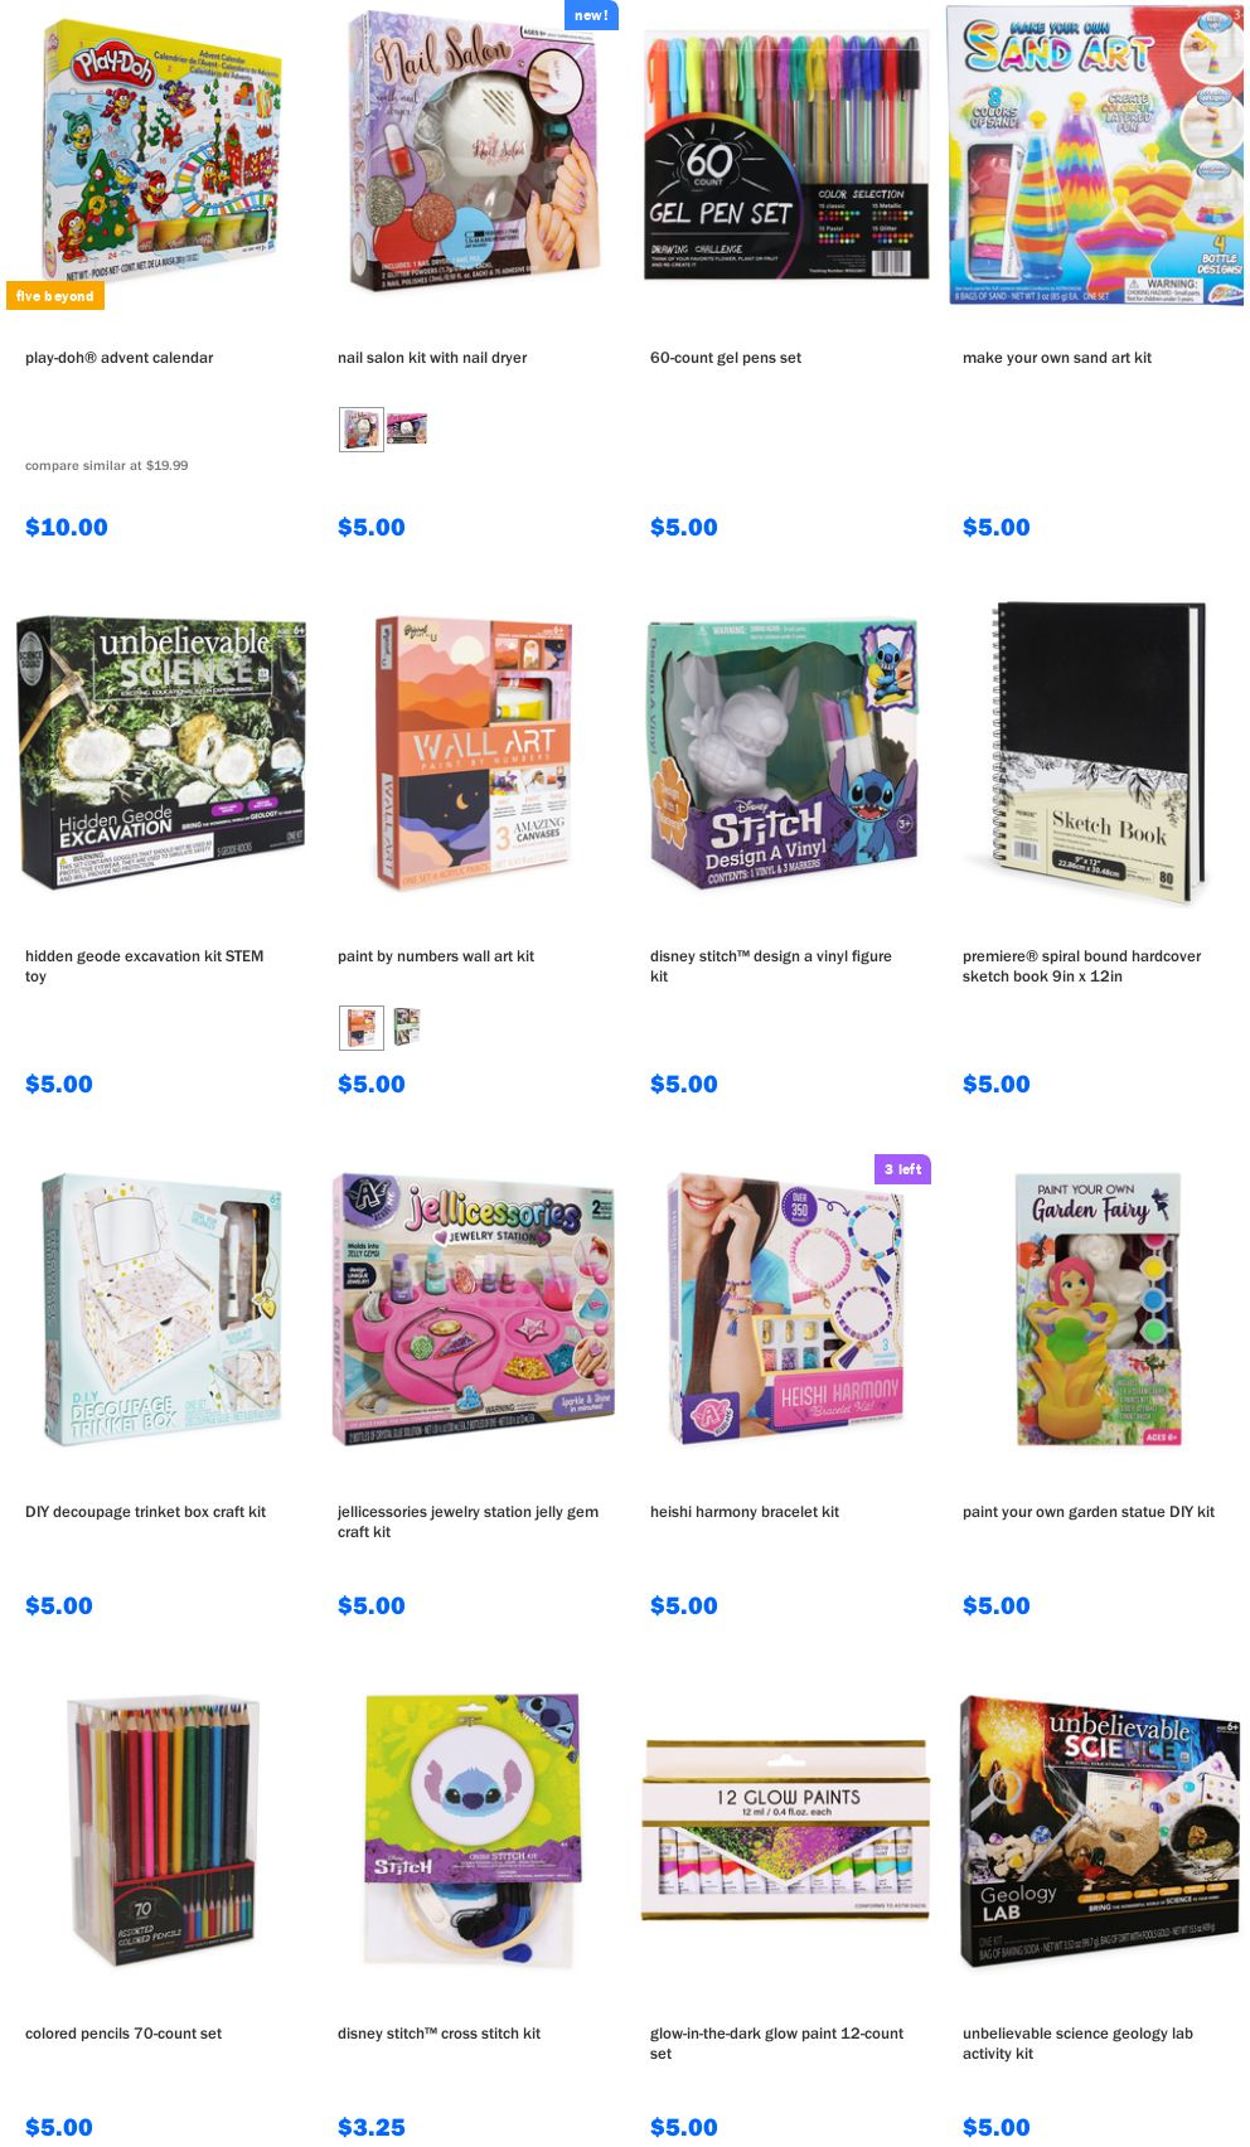 Catalogue Five Below HOLIDAY 2021 from 12/08/2021